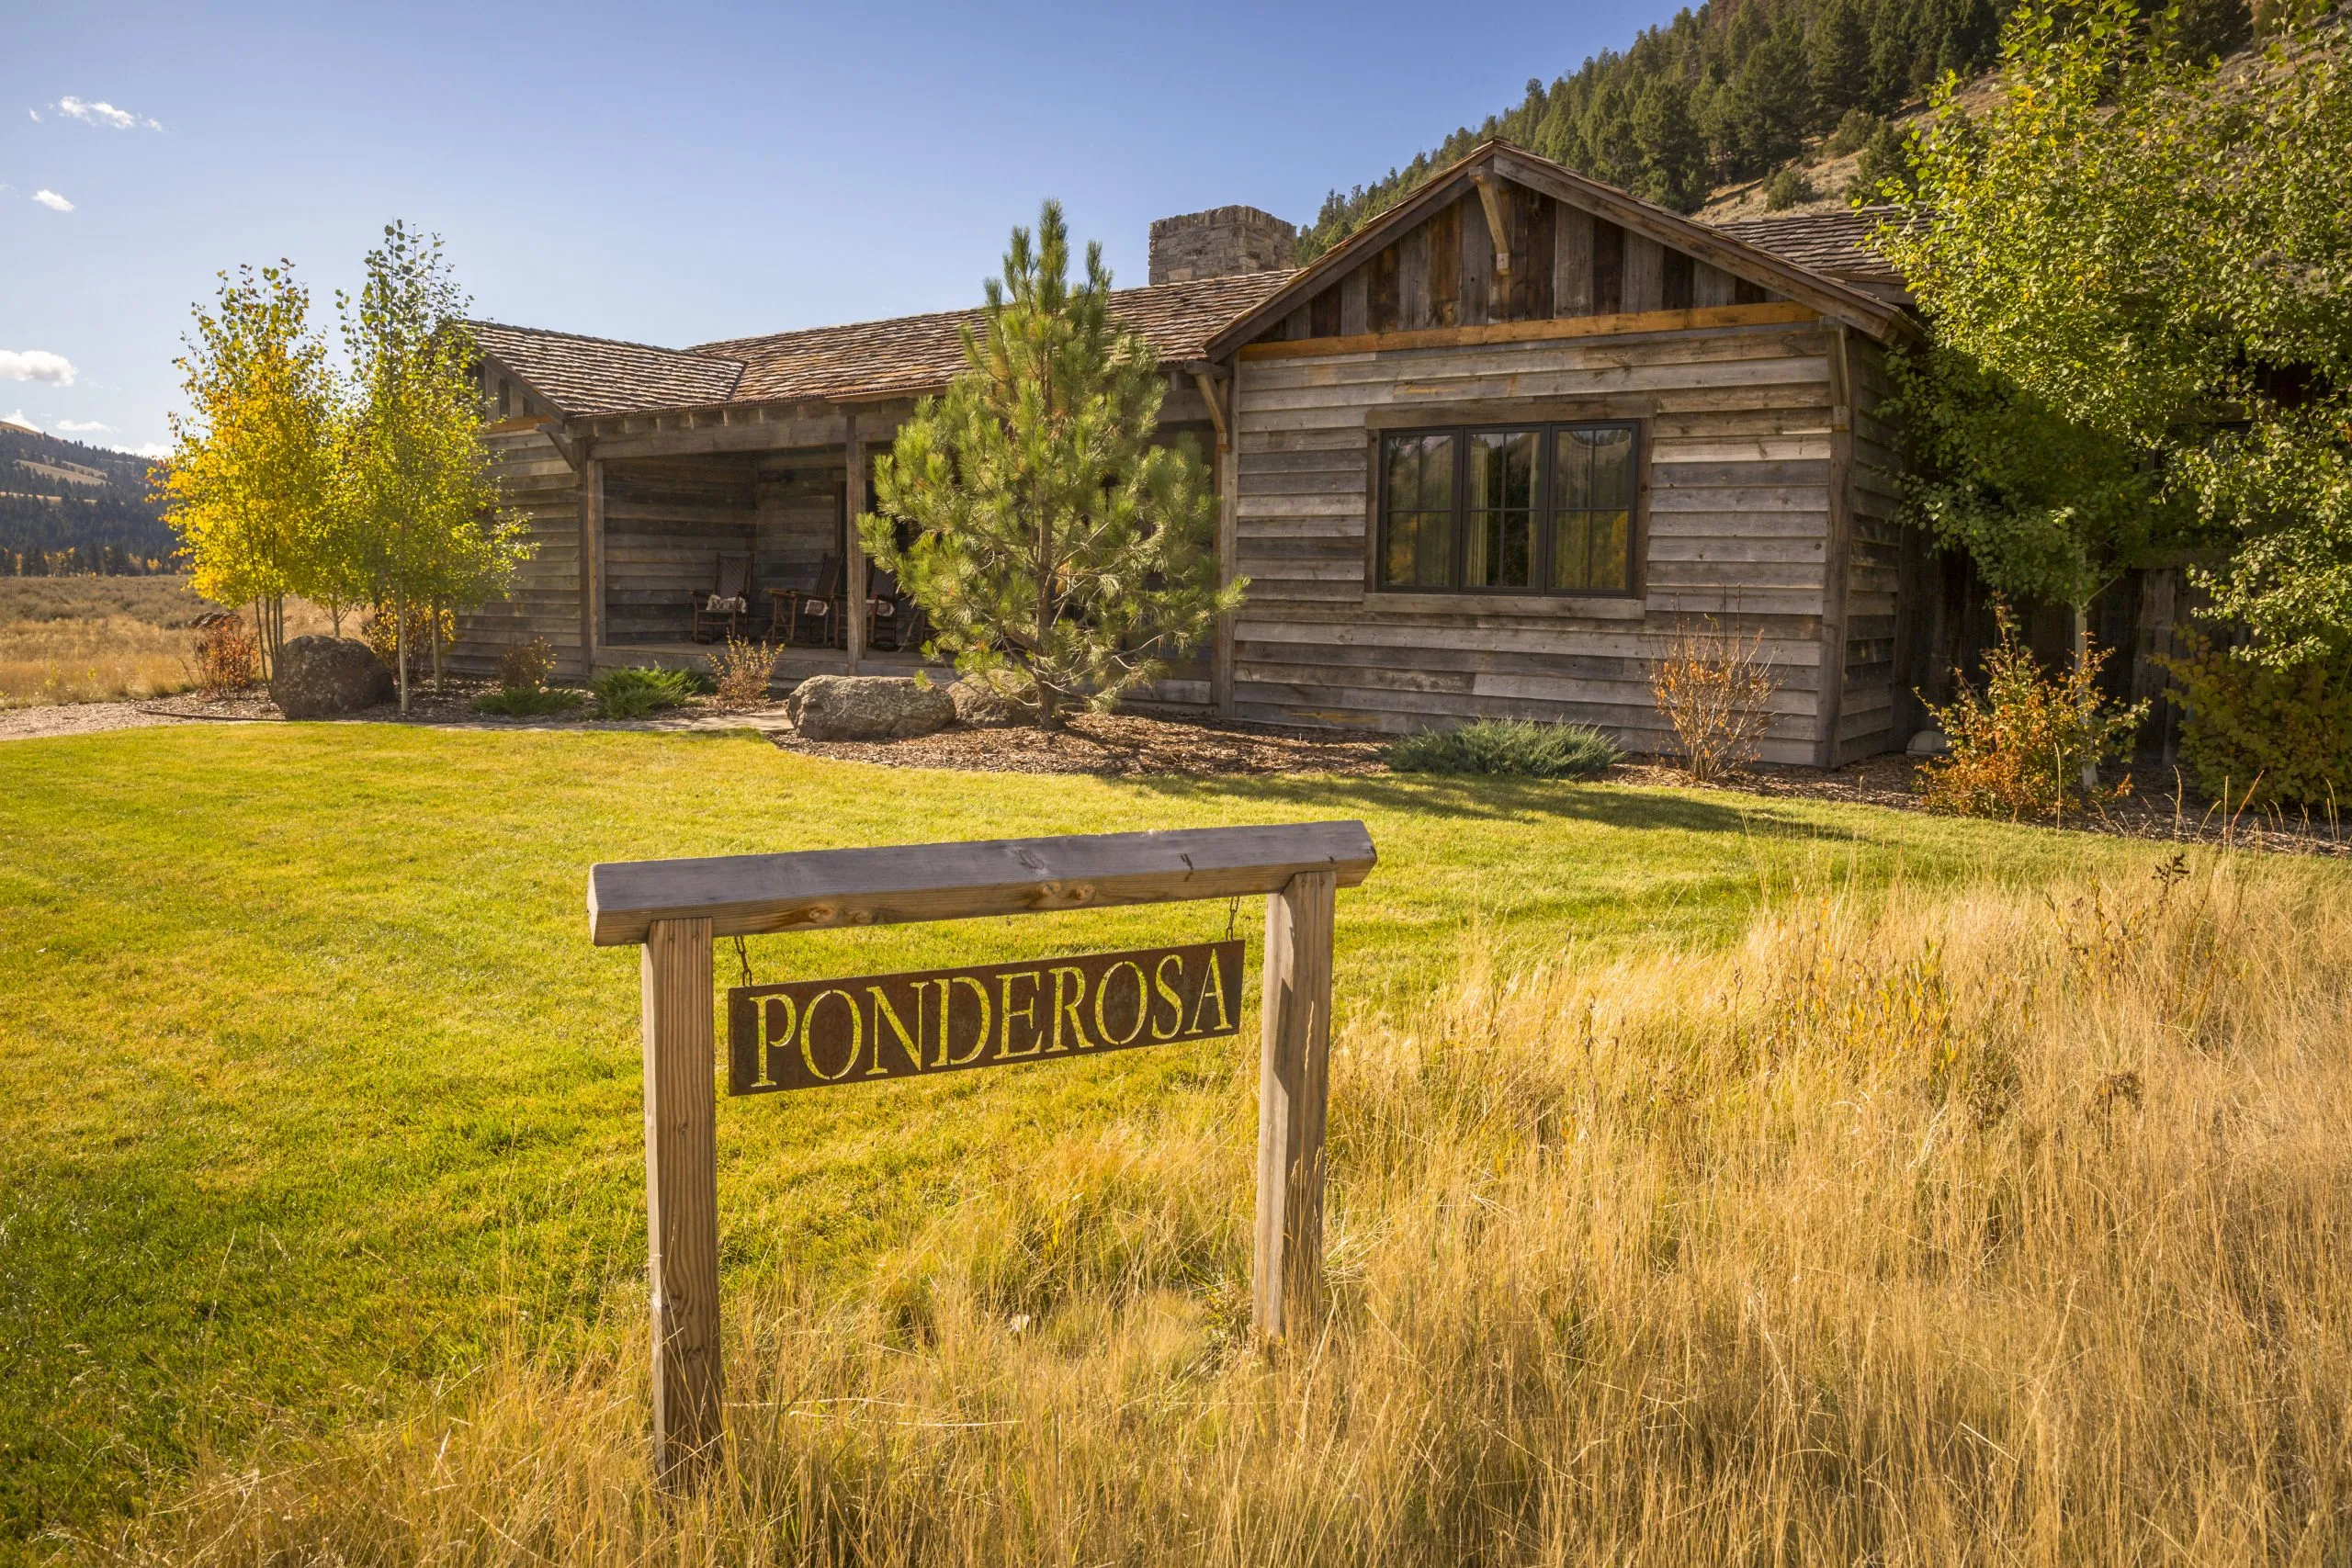 A cabin with a sign that reads "Ponderosa"